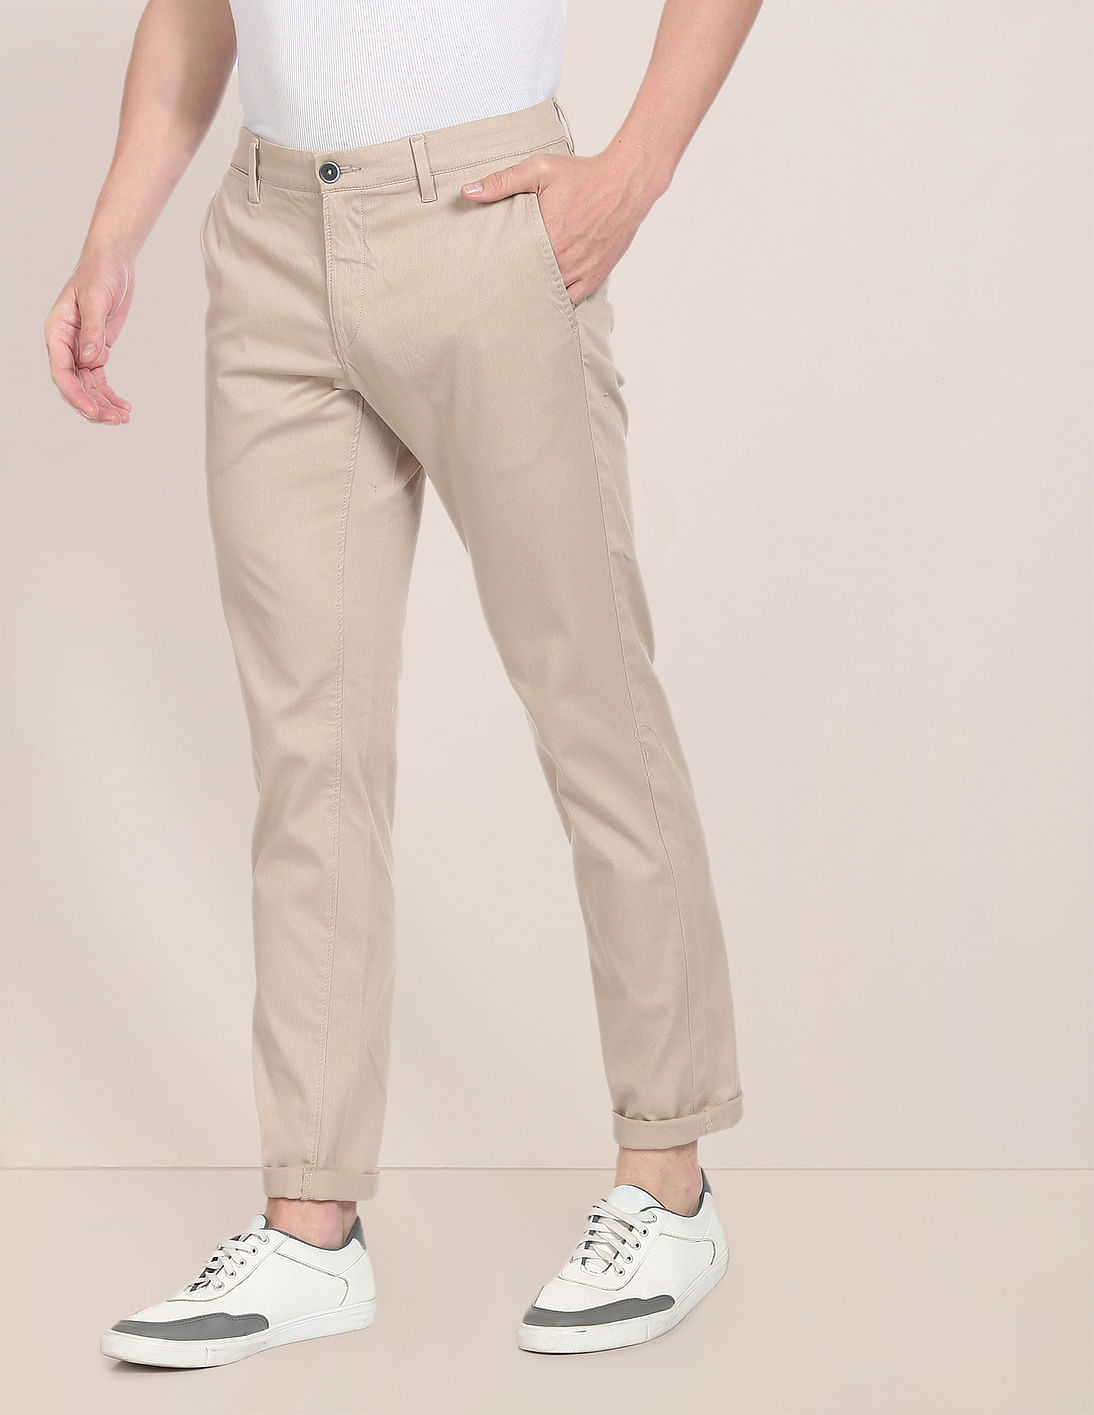 Buy U.S. Polo Assn. Mid Rise Flat Front Solid Trousers - NNNOW.com